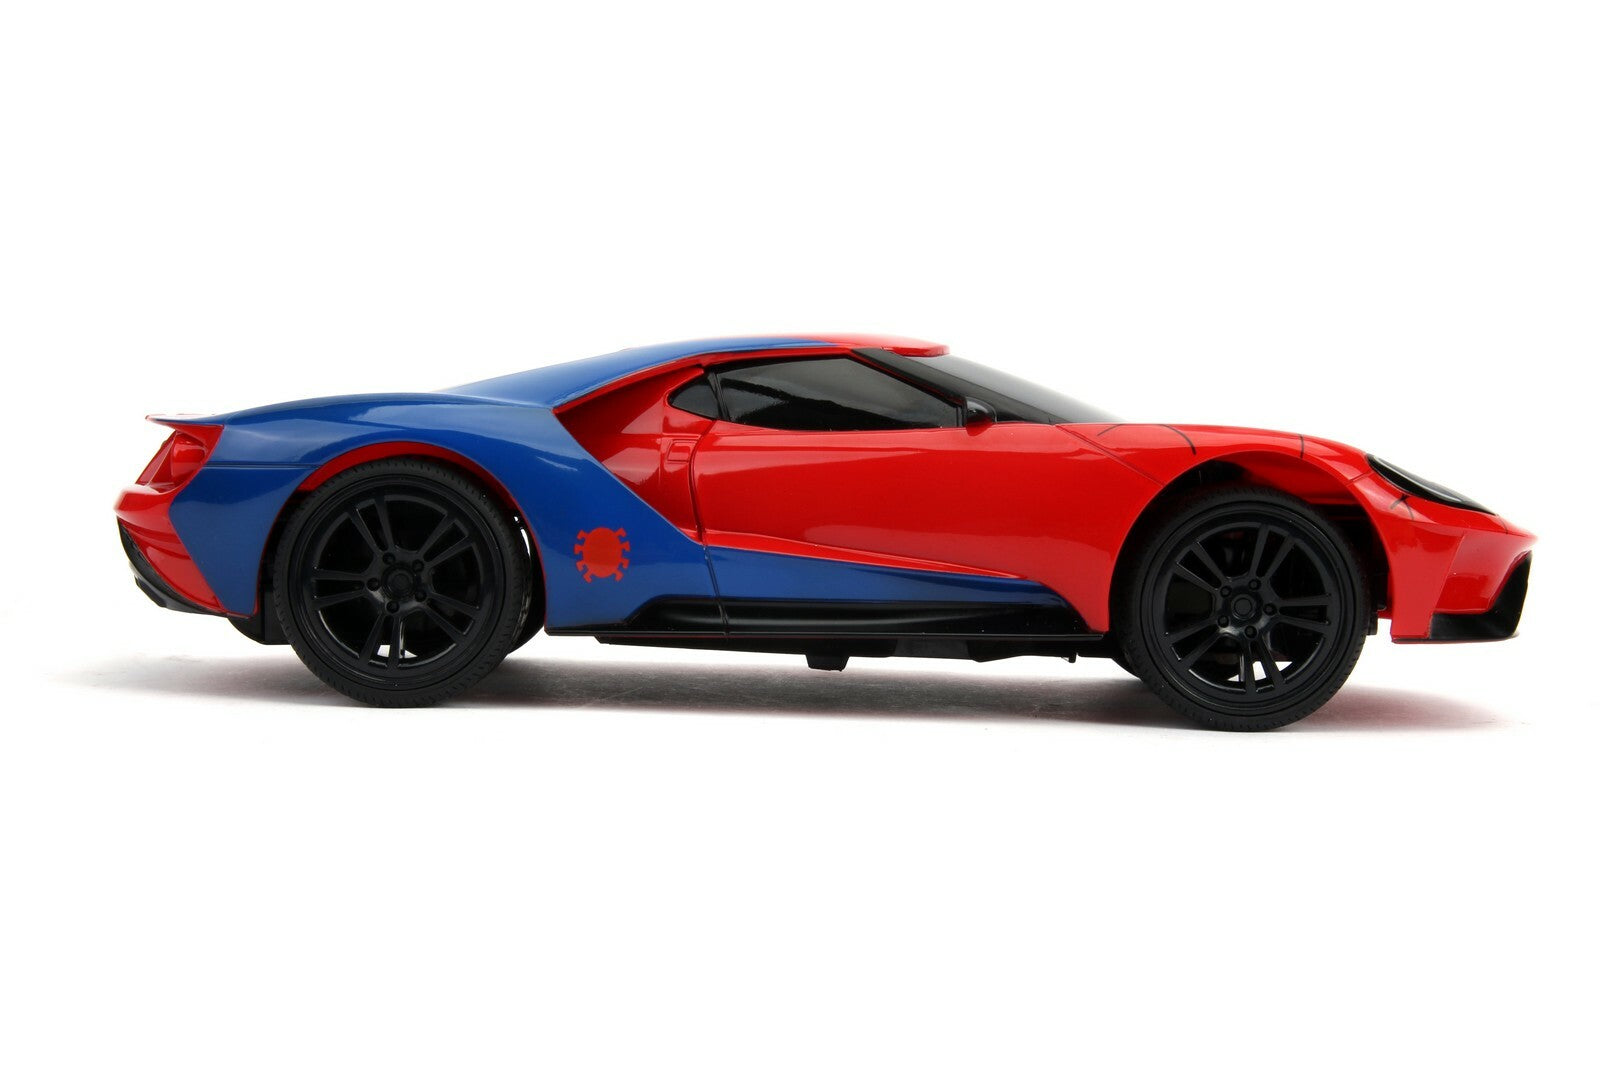  Marvel: Spider-Man - 2017 Ford GT 1:16 Scale Remote Controlled Vehicle  4006333070389